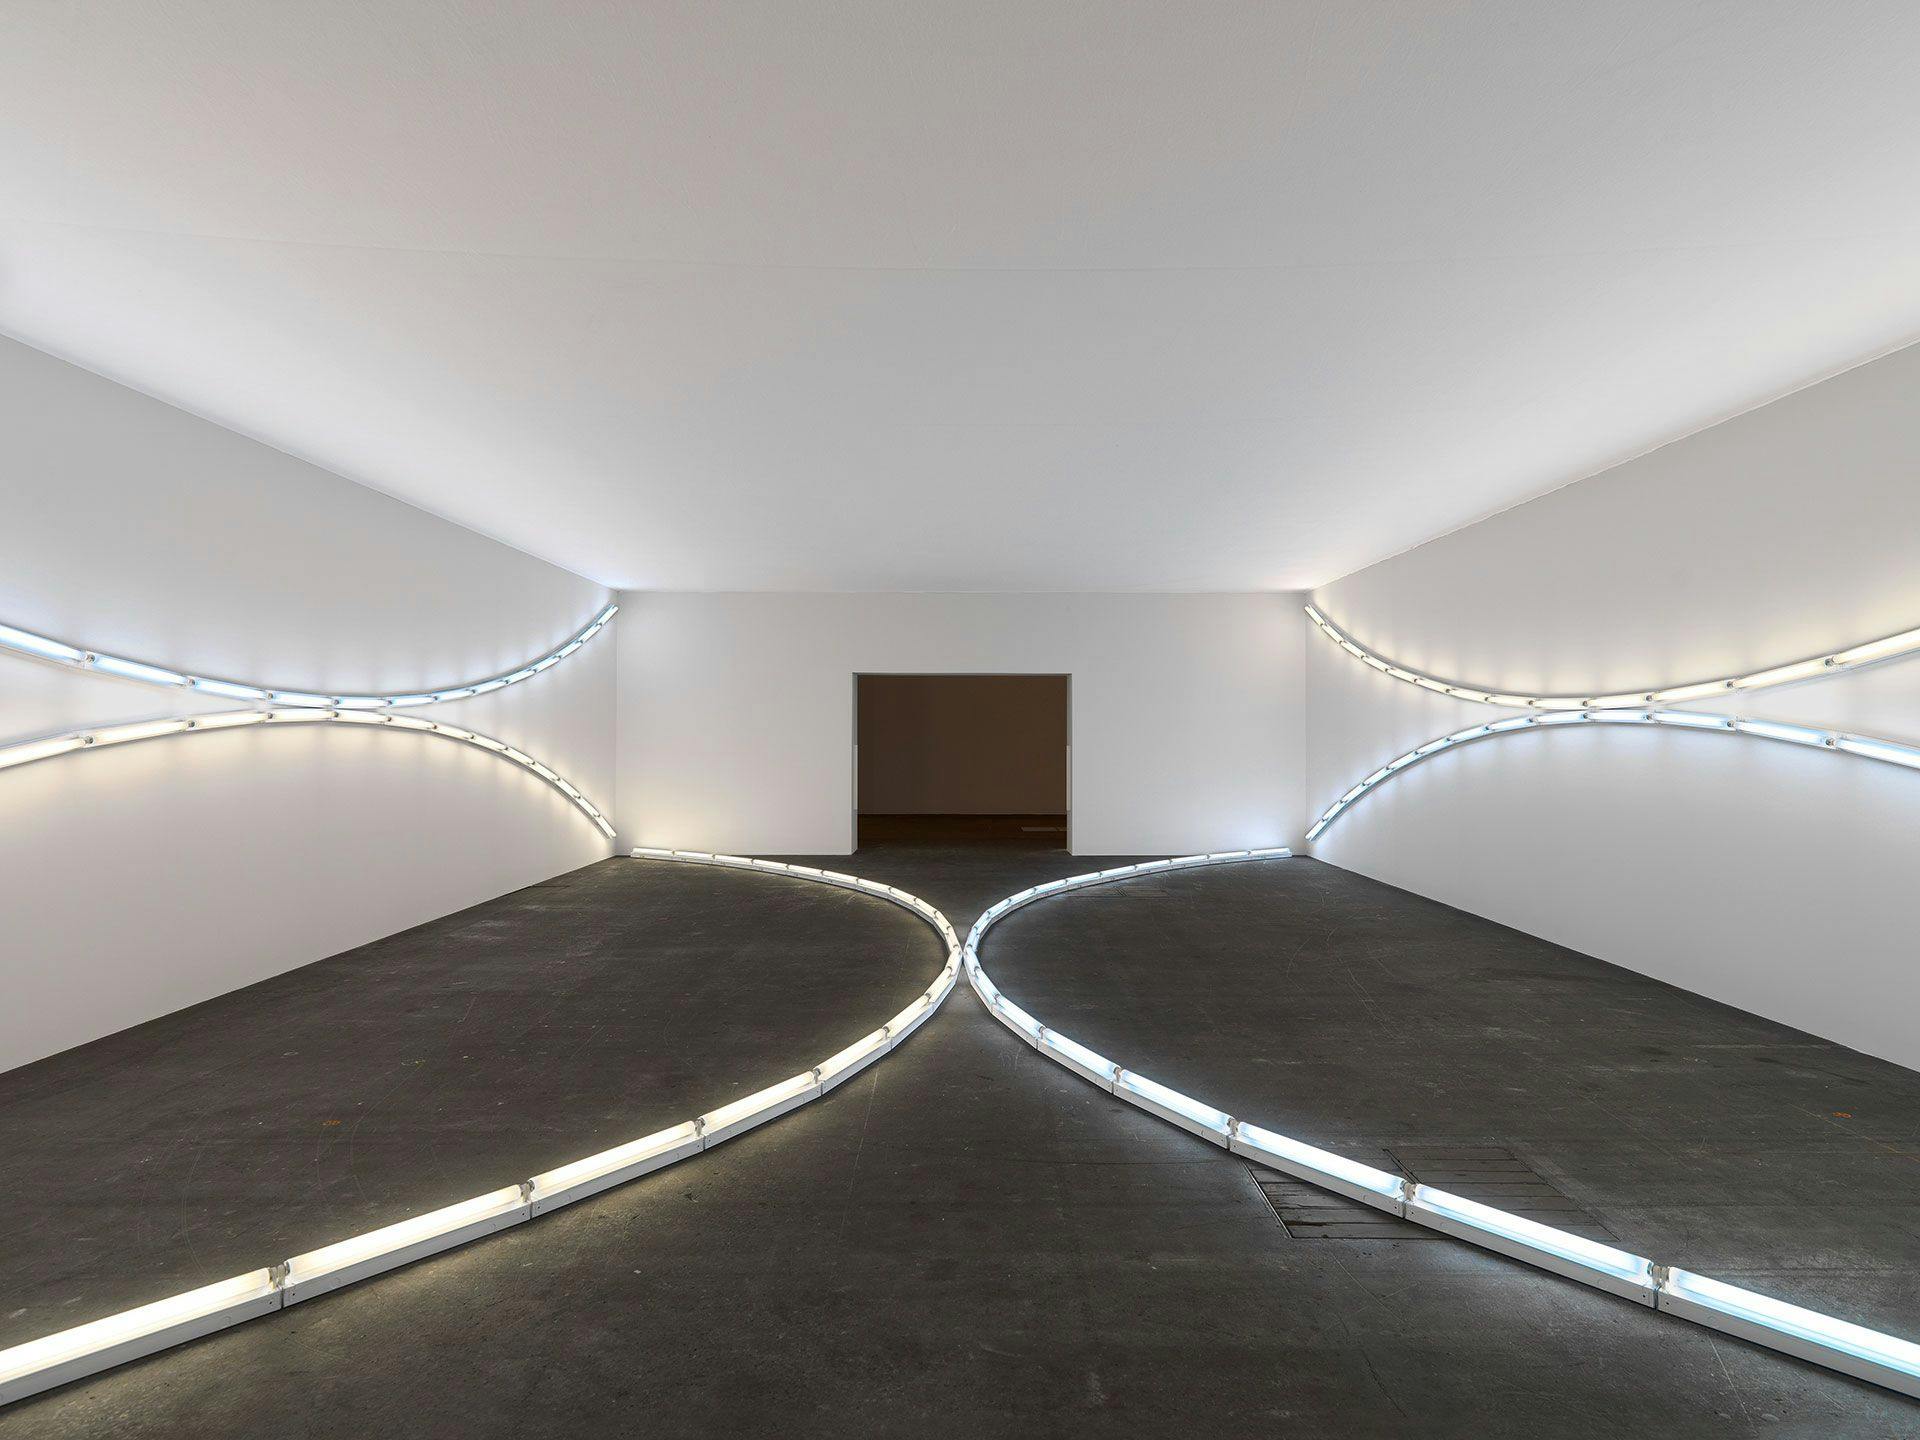 A sculpture in daylight and cool white fluorescent light by Dan Flavin, titled three sets of tangented arcs in daylight and cool white (to Jenny and Ira Licht), dated 1969.